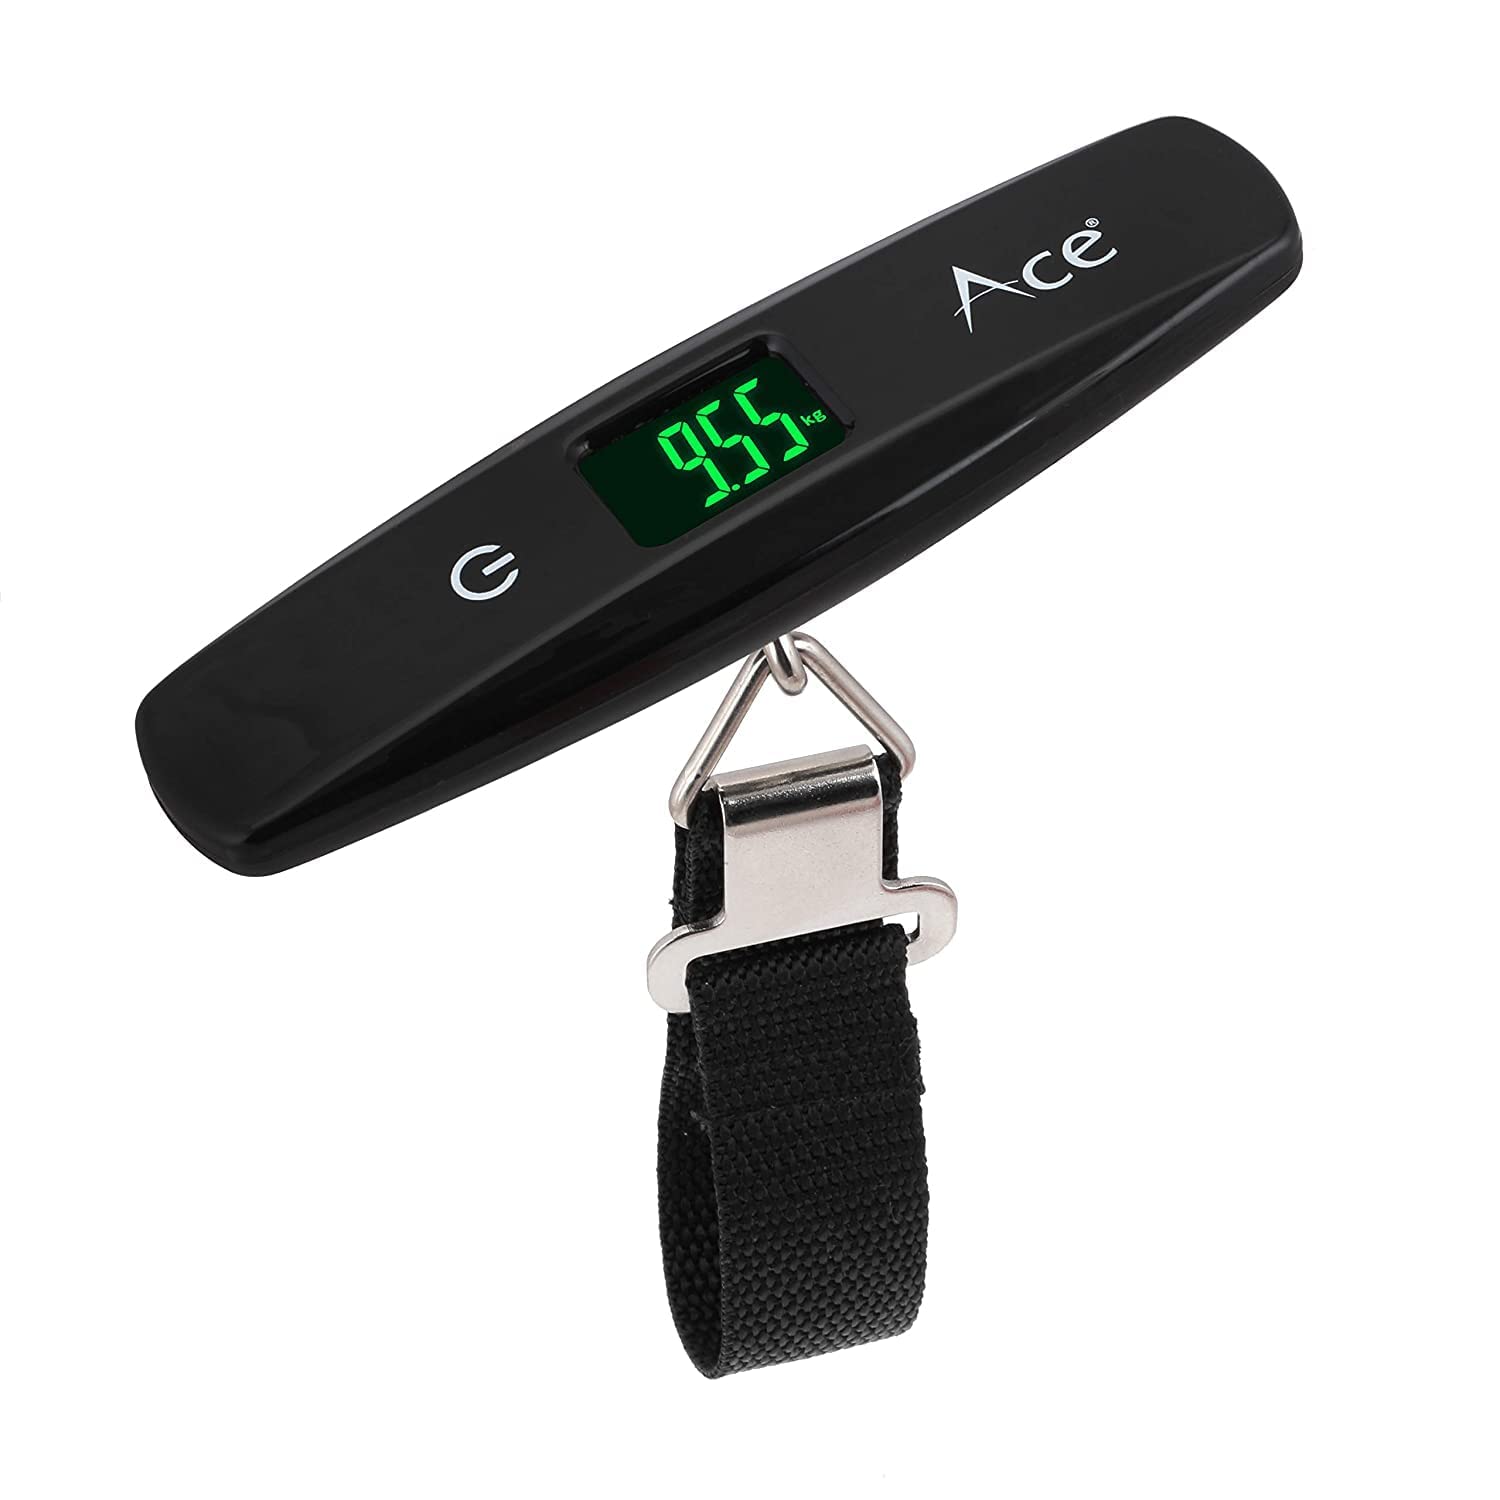 ACE Digital Electronic LCD Luggage Hanging Weighing Scale Belt - Black